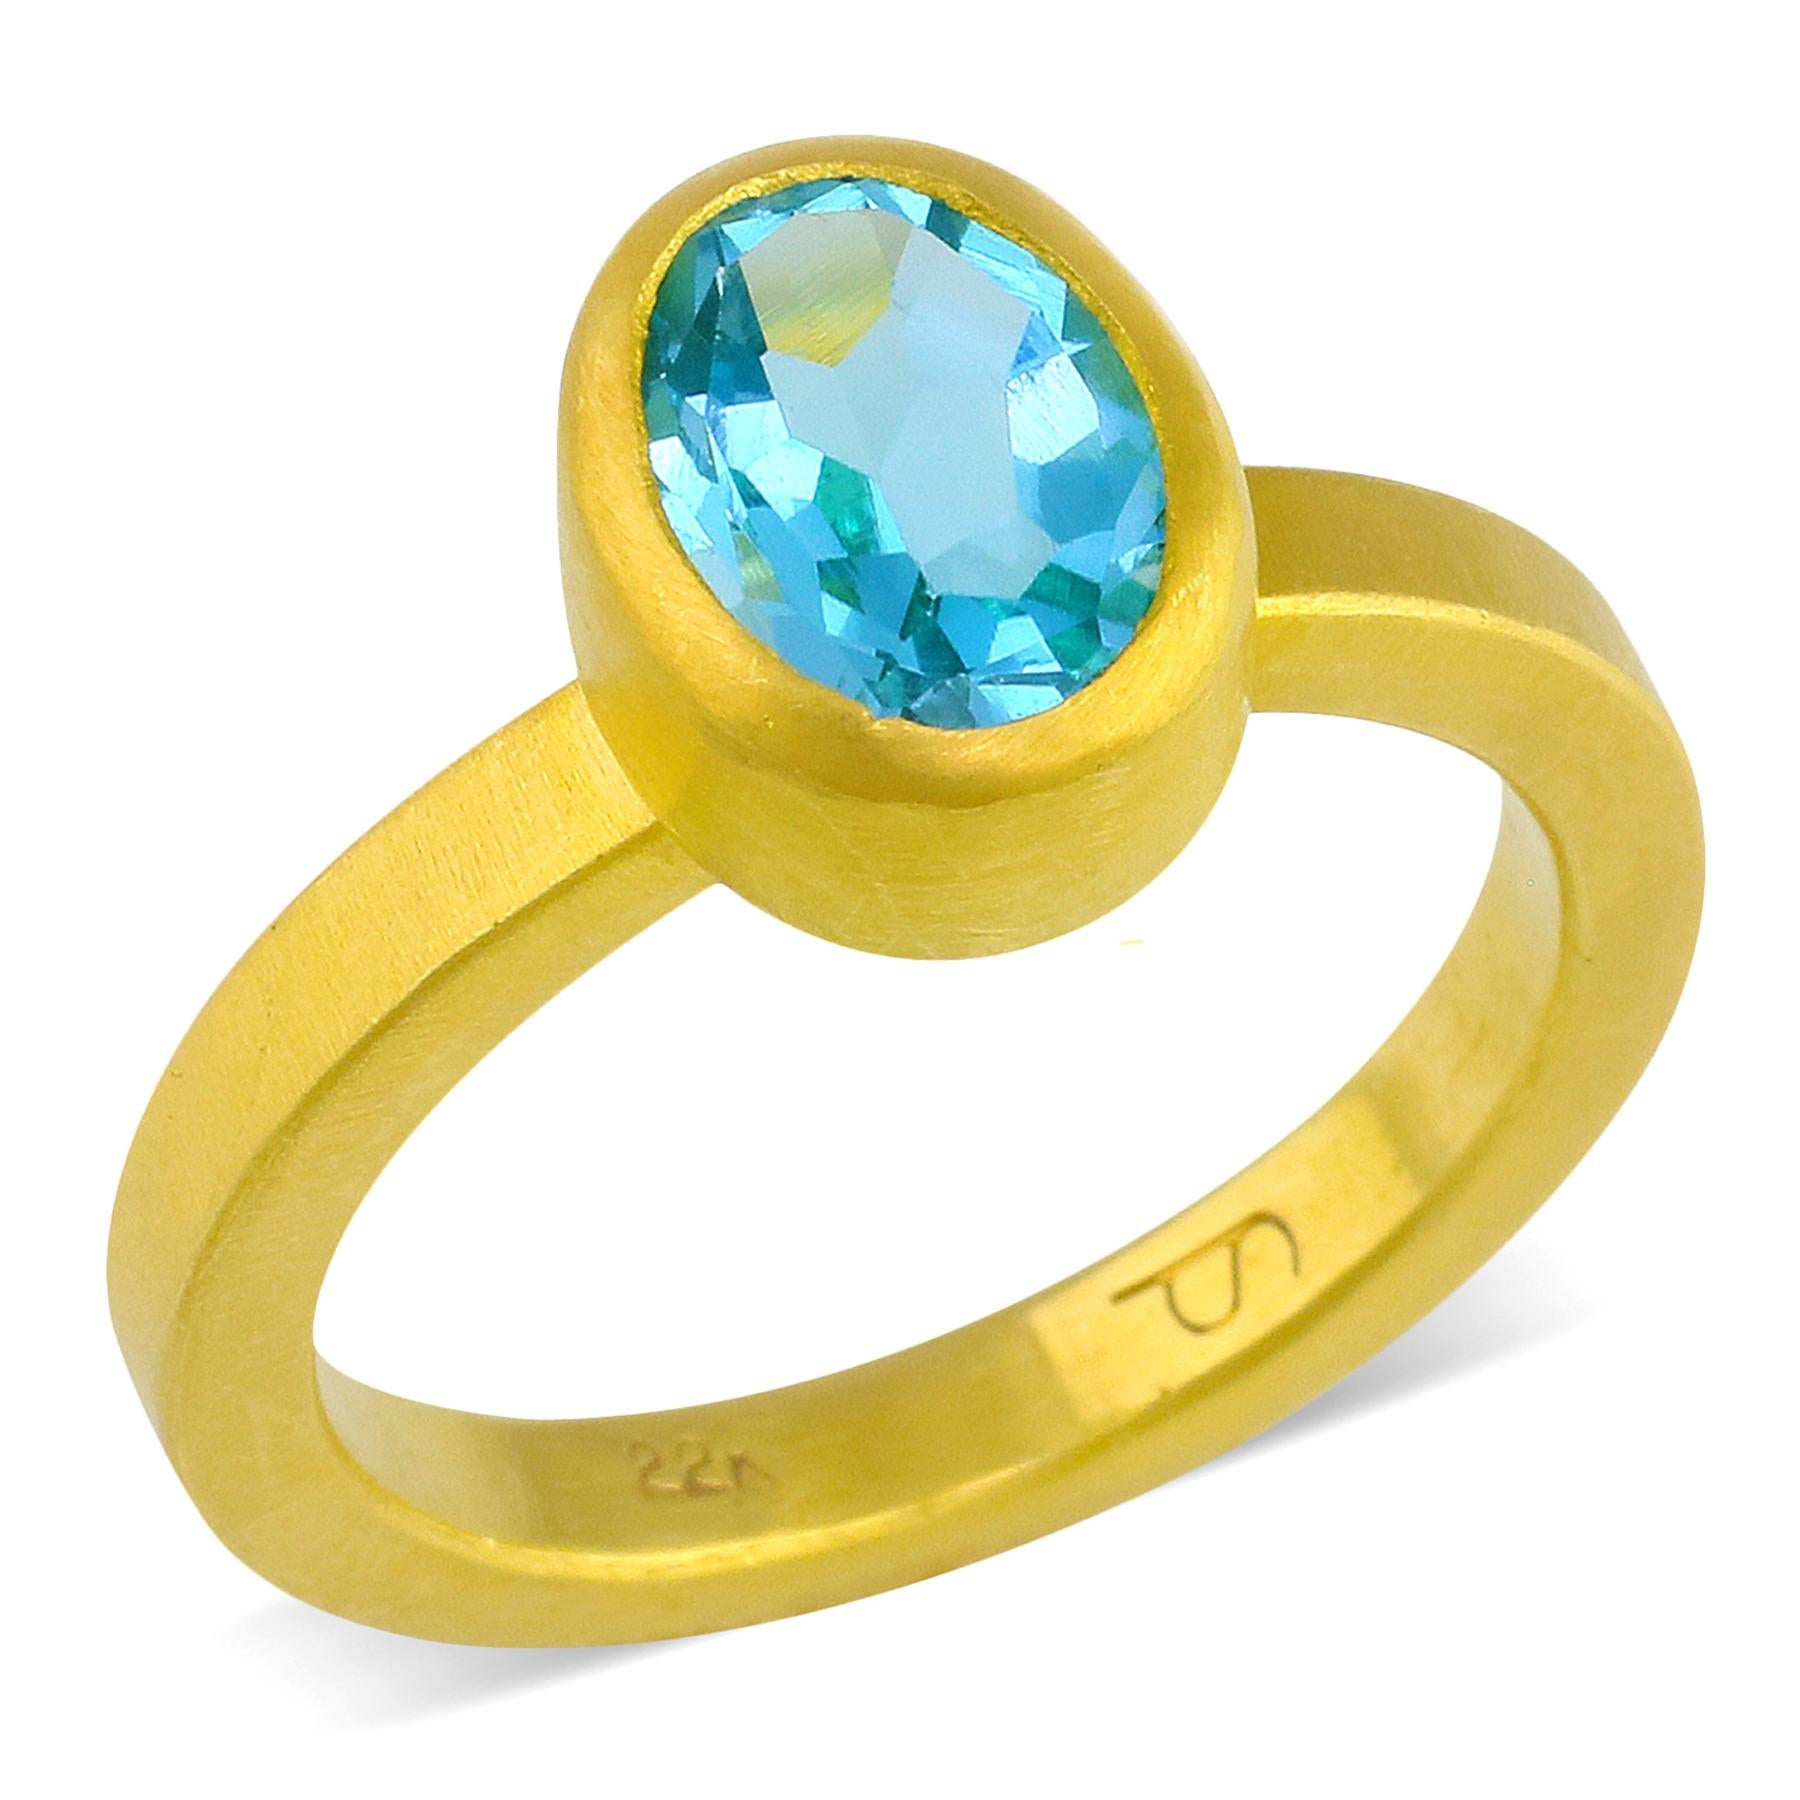 PHILIPPE SPENCER - 2.15 Ct. Oval Topaz wrapped in 22K Backless Gold bezel setting and Heavy Solid 22K Anvil-Forged & Finished Solitaire Ring.  Heavy Brushed Exterior, Mirror Polish Interior Finish. Suitable for nesting with other rings. Size 7 1/2,